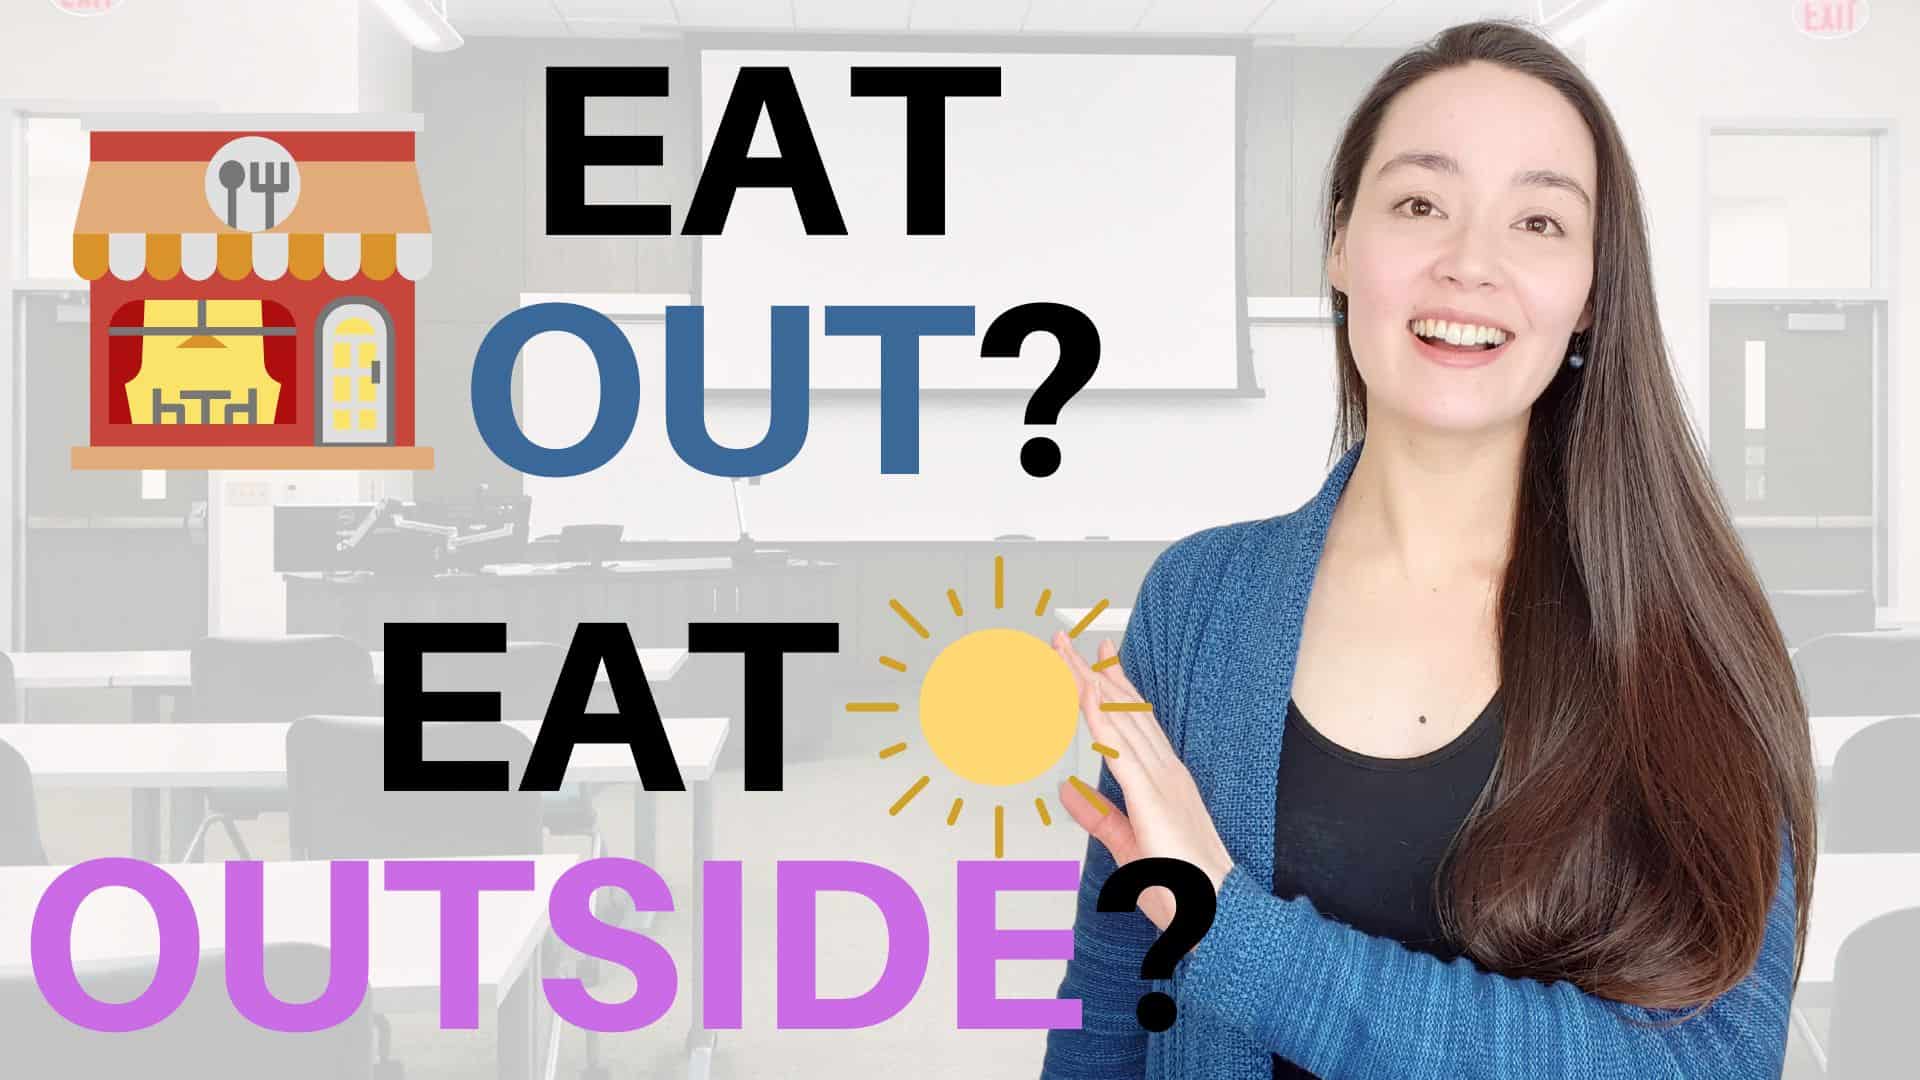 EAT OUT or EAT OUTSIDE? There is a difference!